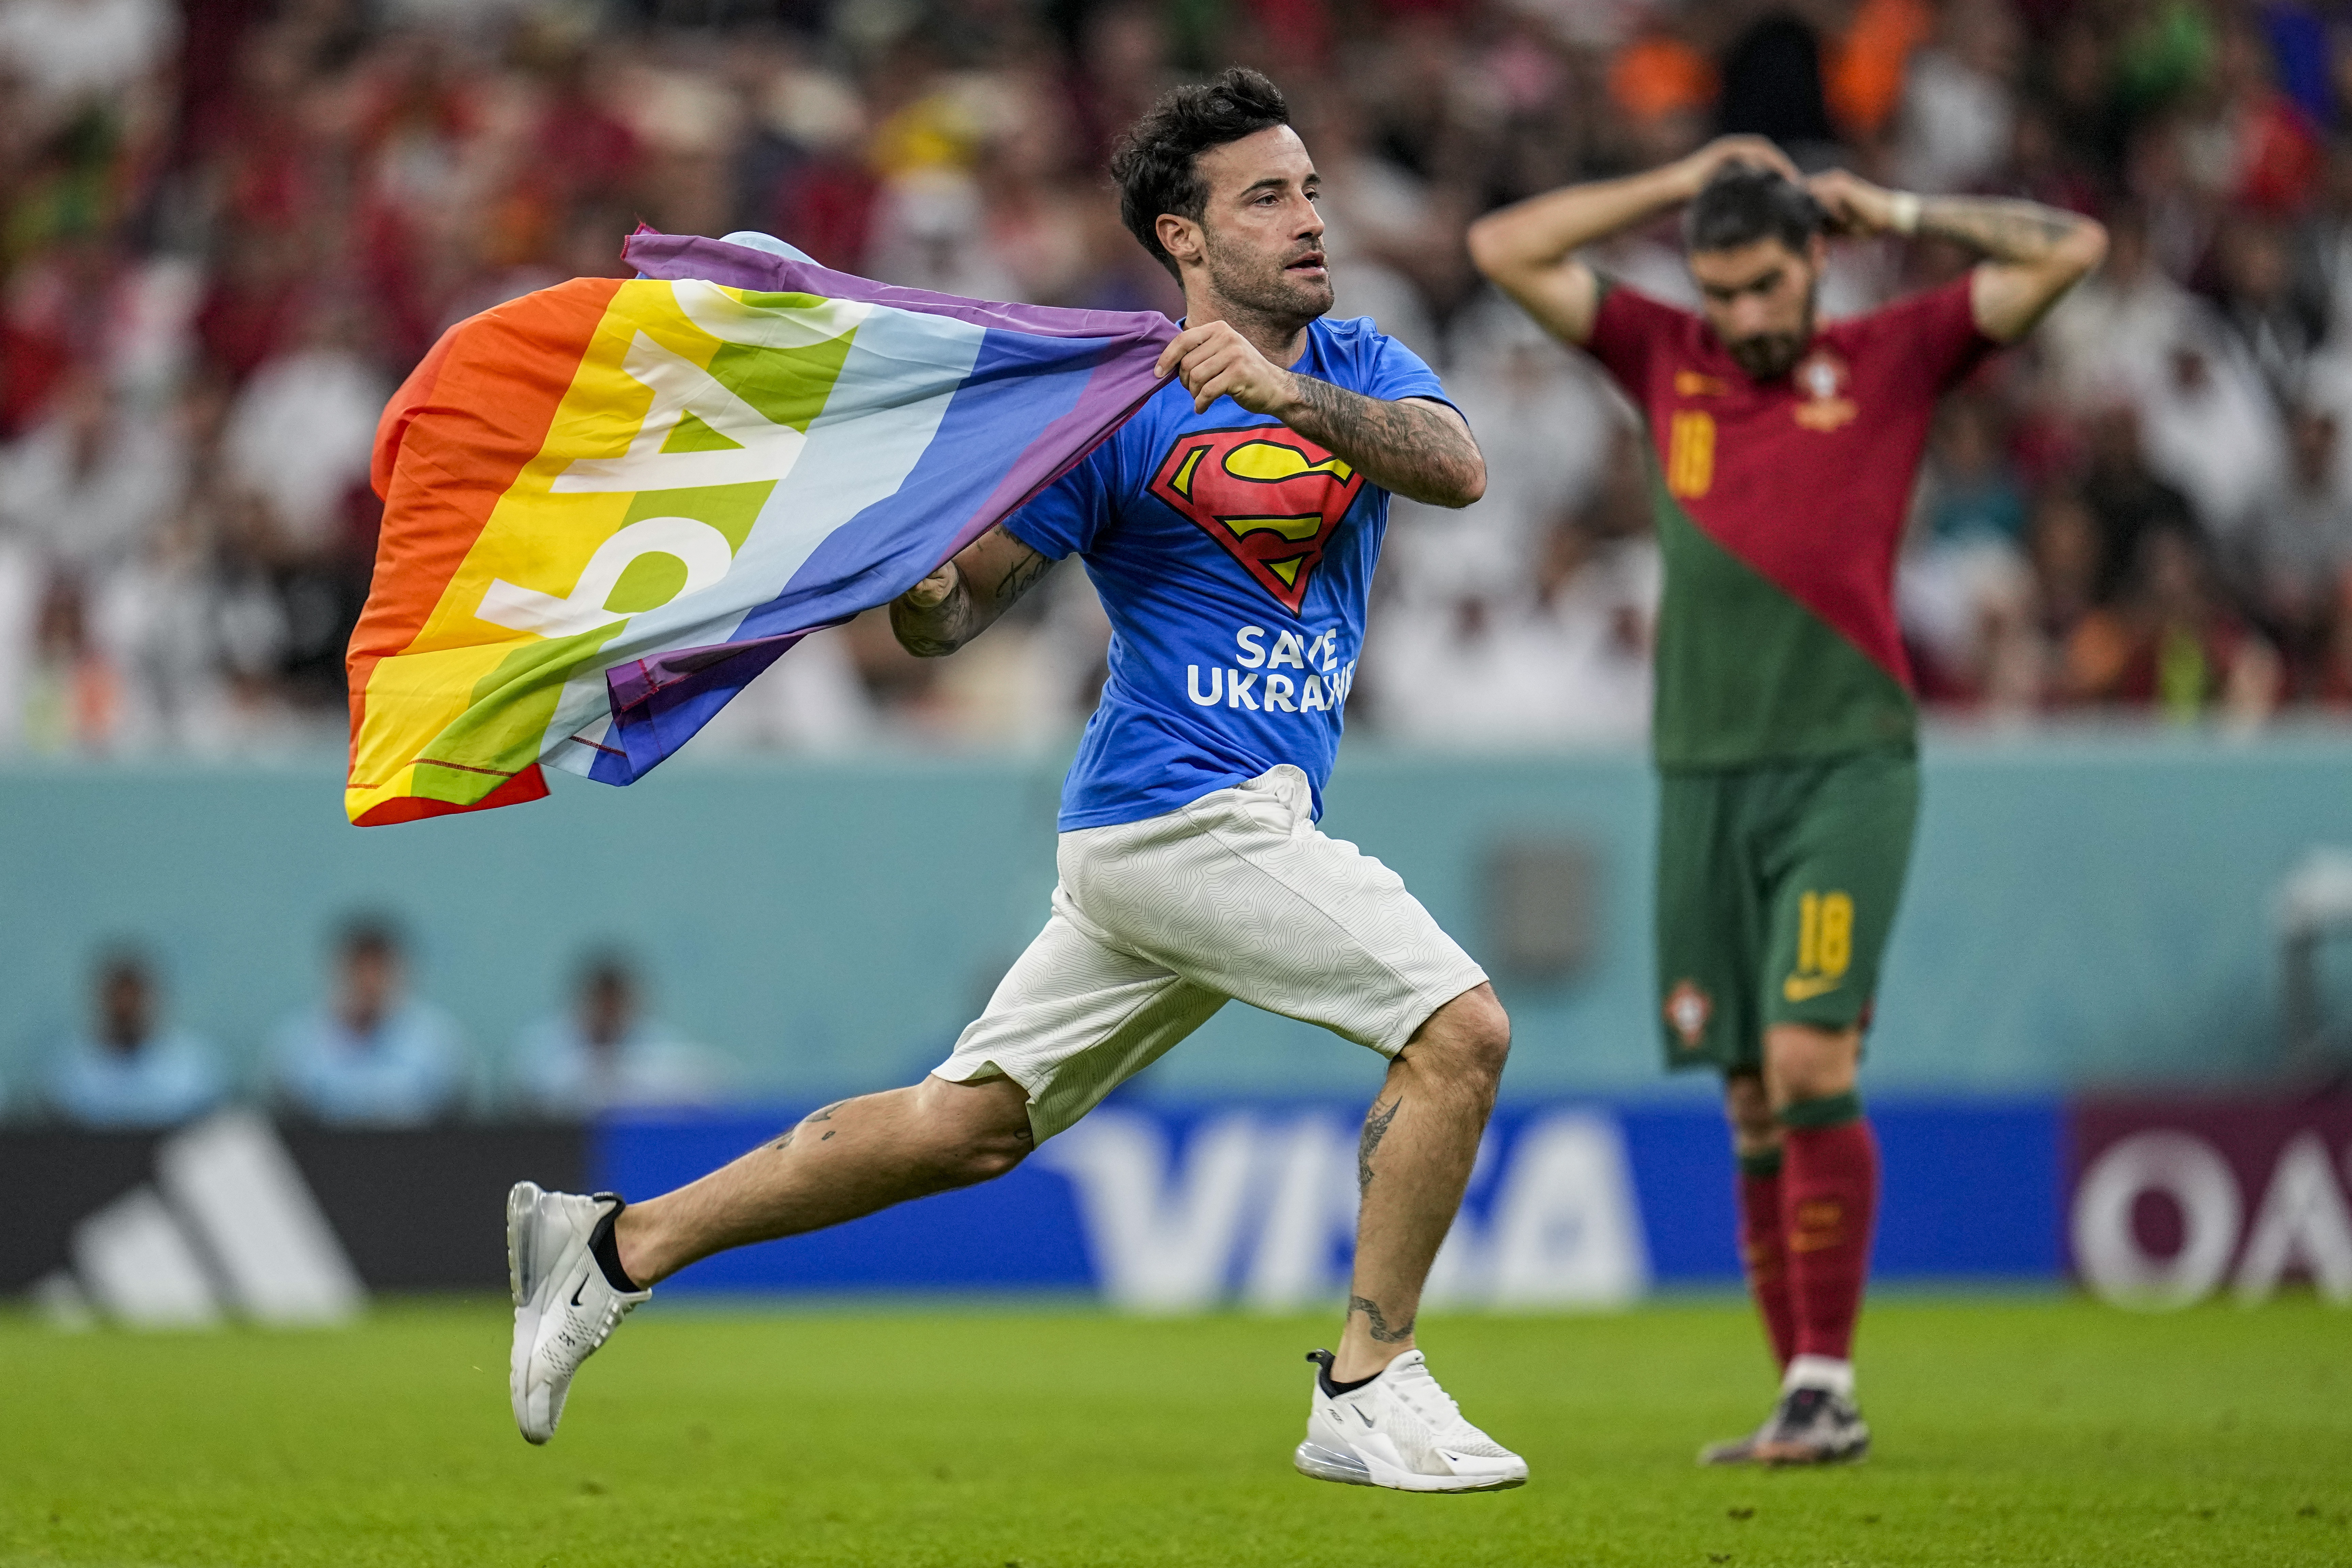 FIFA World Cup 2022 FIFA Gives Assurance That Rainbow Items and Banners will Allowed into Stadiums